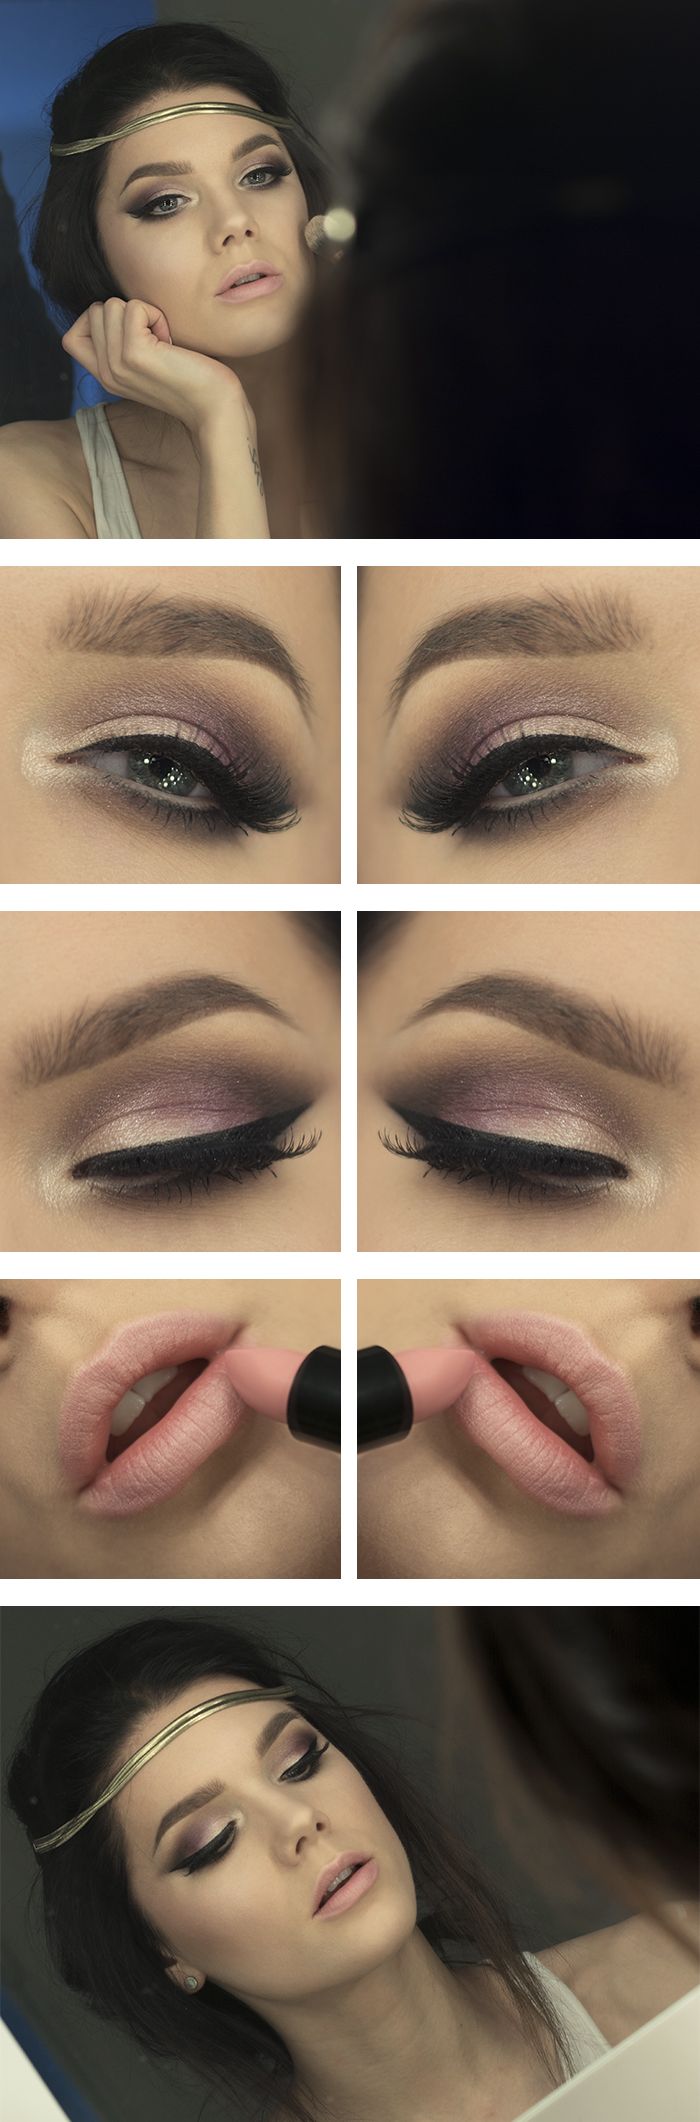 13 Fashionable Makeup Ideas and Tutorials with Nude Lips 